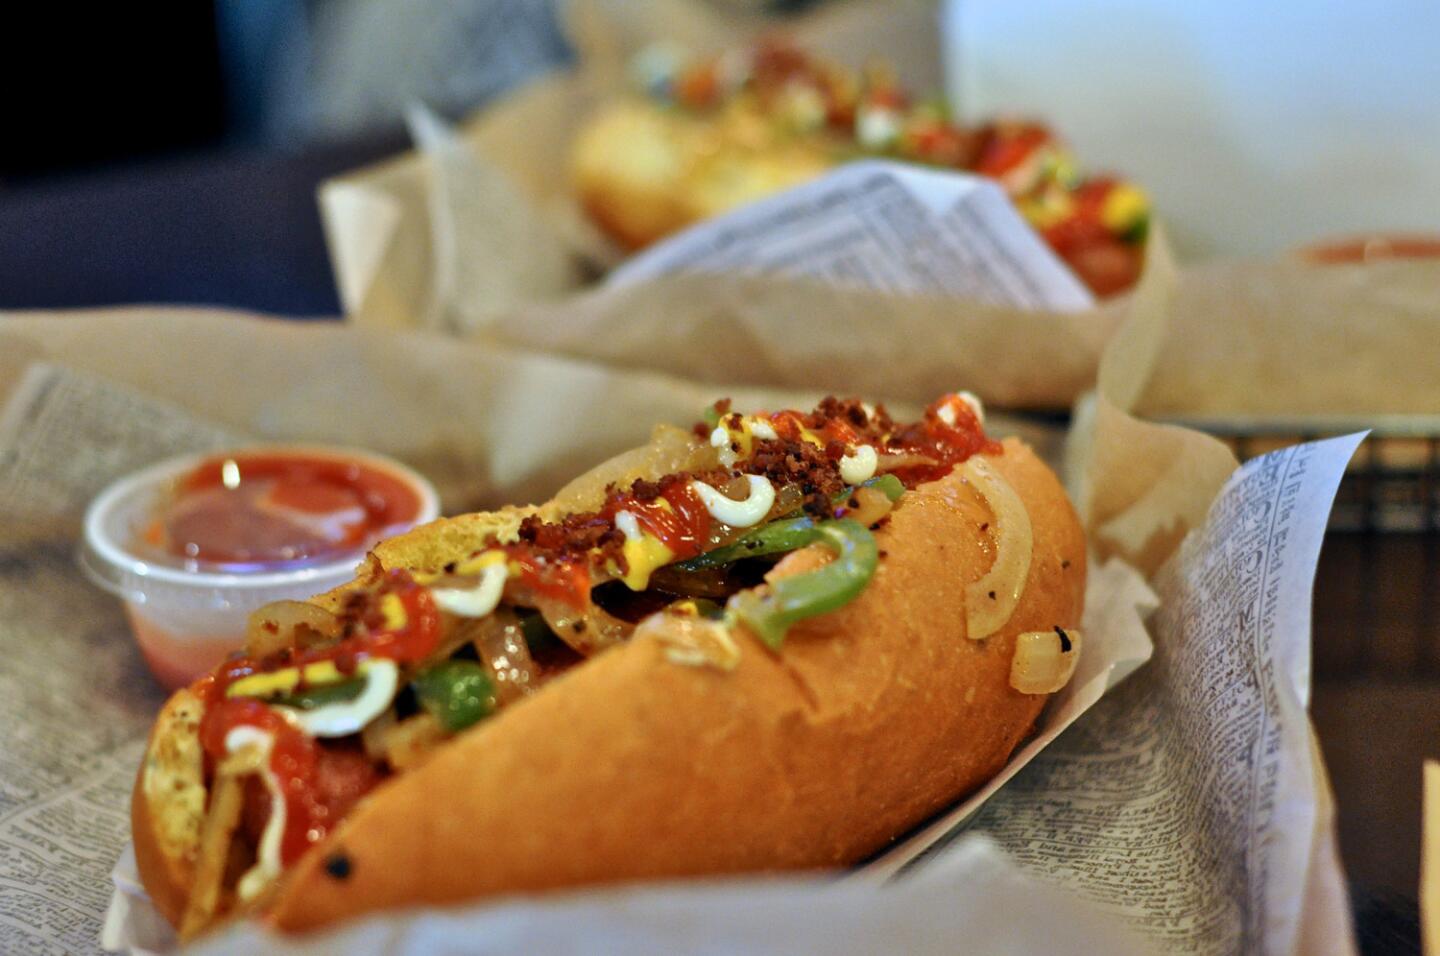 The House, or original, bacon-wrapped hot dog at Dirt Dog near USC comes loaded with grilled onions and peppers.